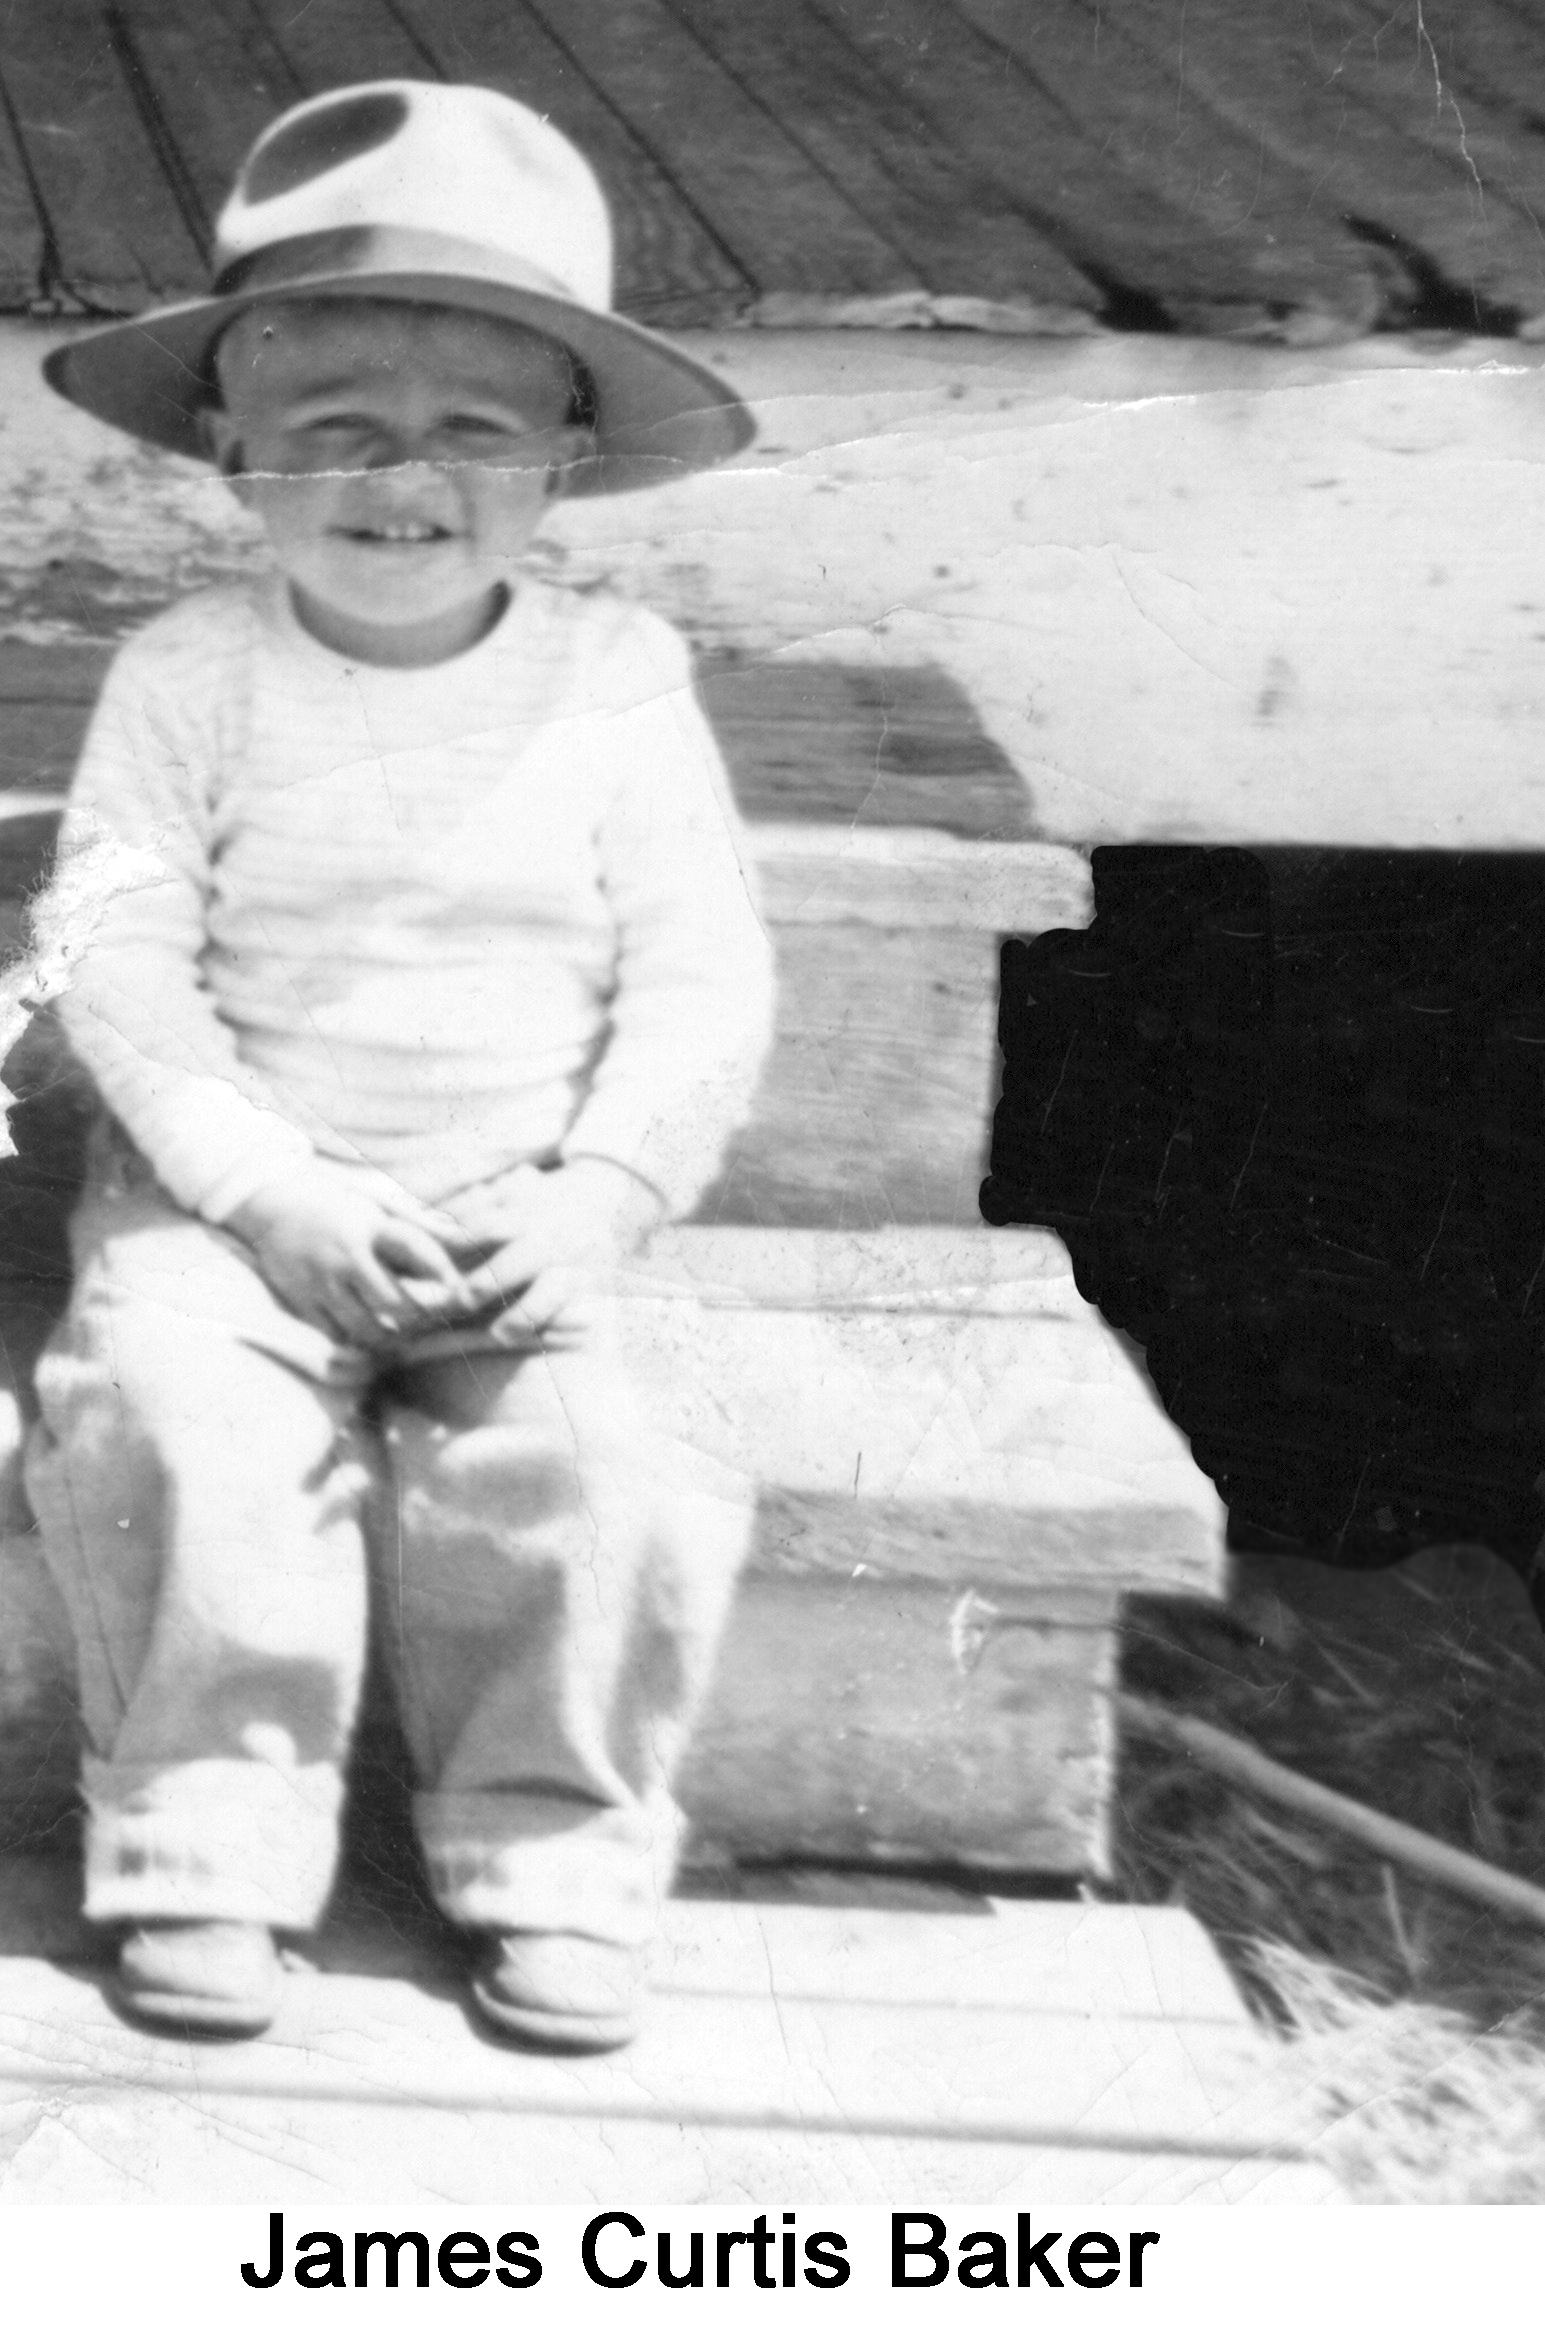 Curt is sitting on steps, wearing an oversized, brmmed hat.